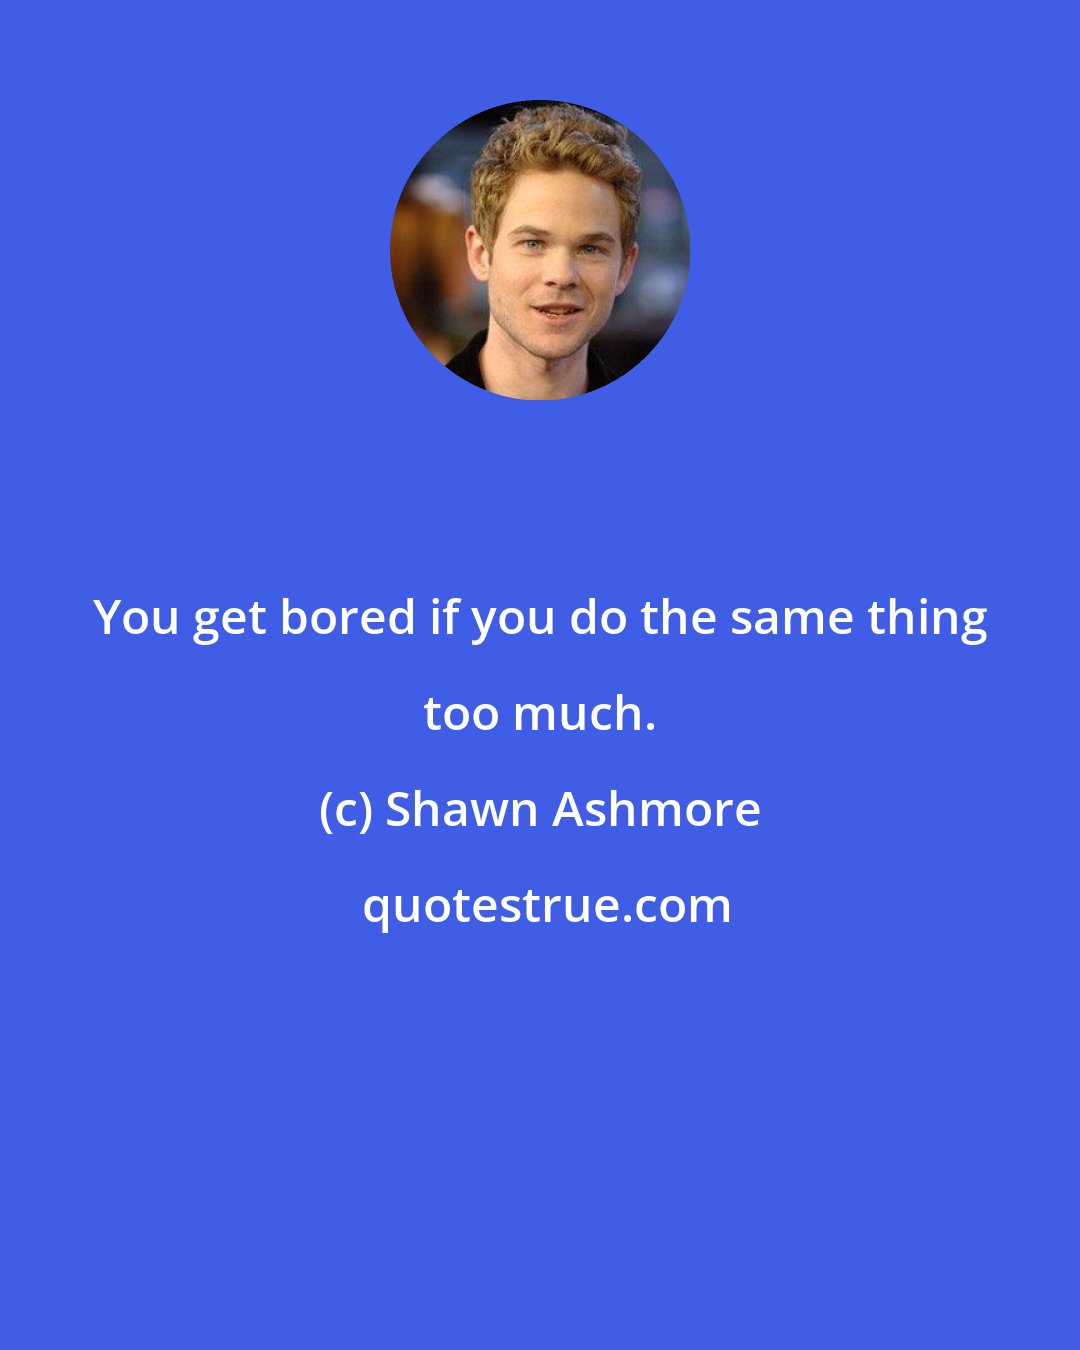 Shawn Ashmore: You get bored if you do the same thing too much.